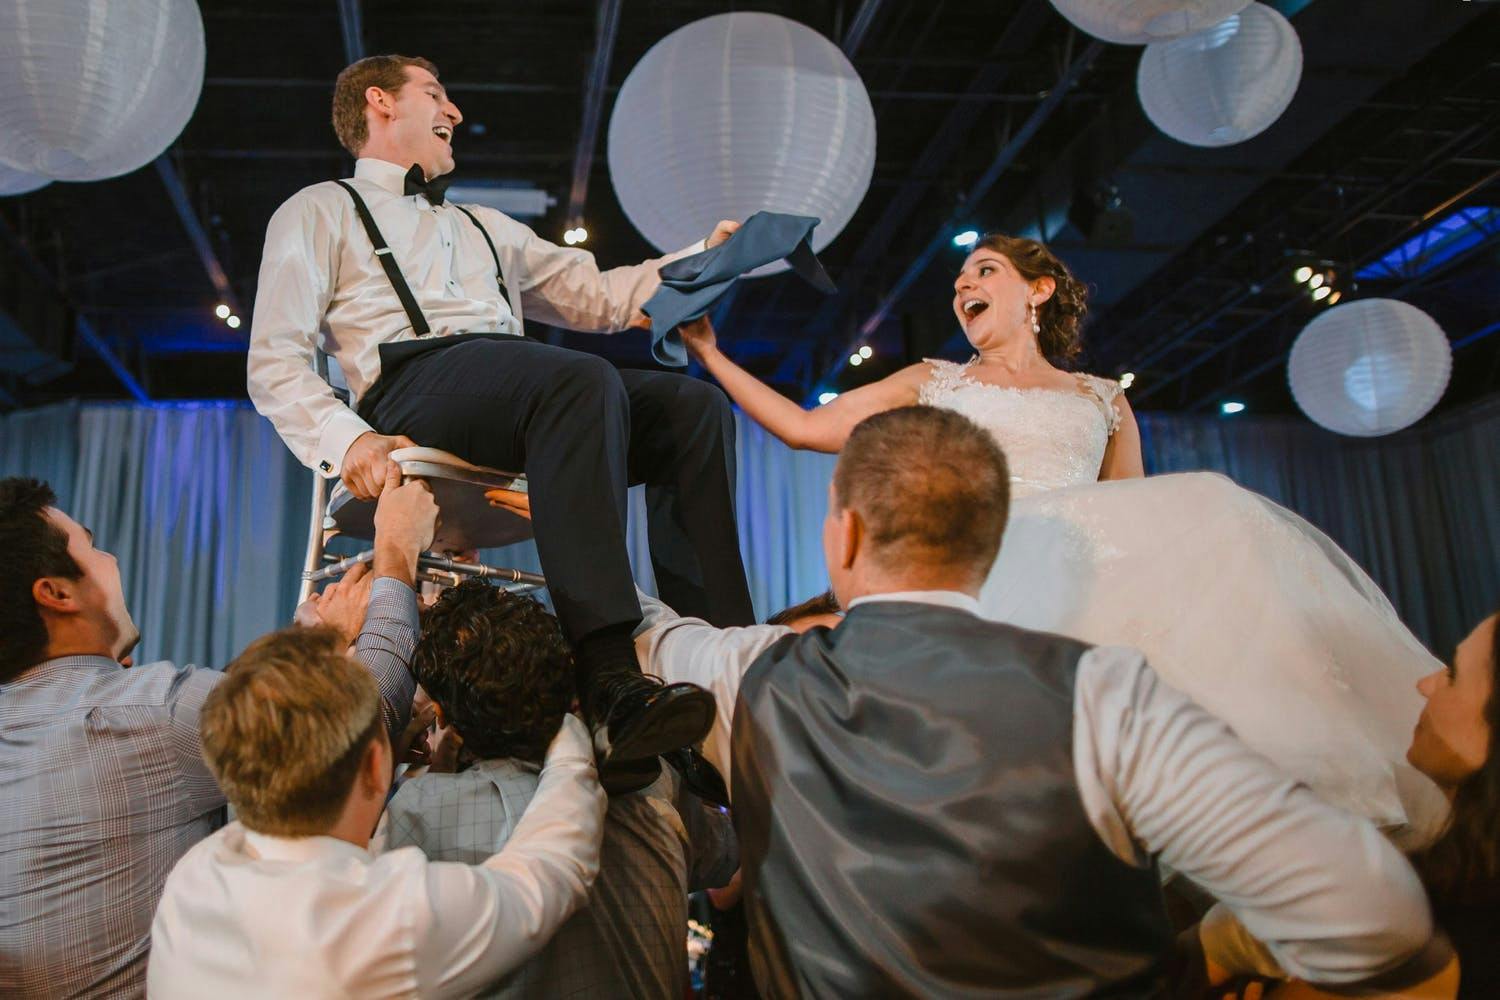 Wedding Hora With Bride and Groom Lifted into the Air Underneath White Globed Paper Lanterns | Partyslate